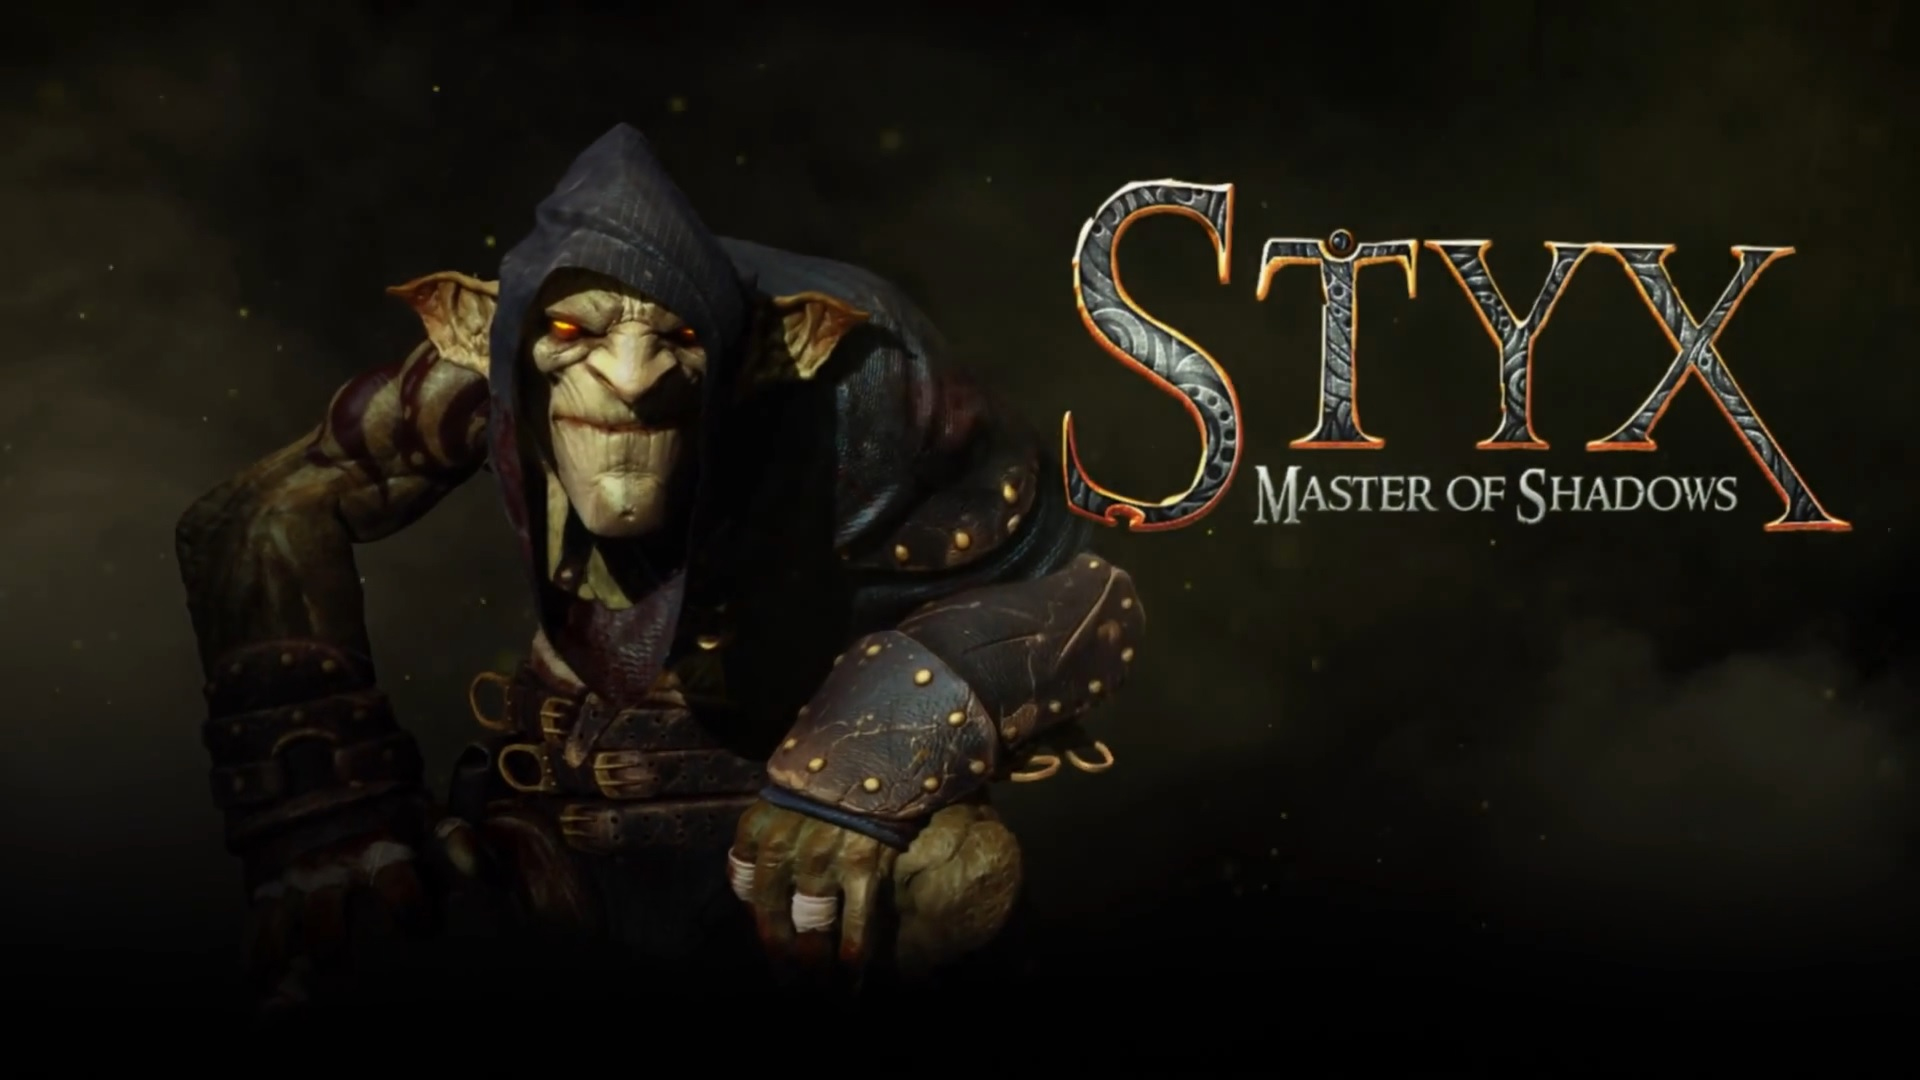 Styx: Master of Shadows review: Into the Lion’s Den